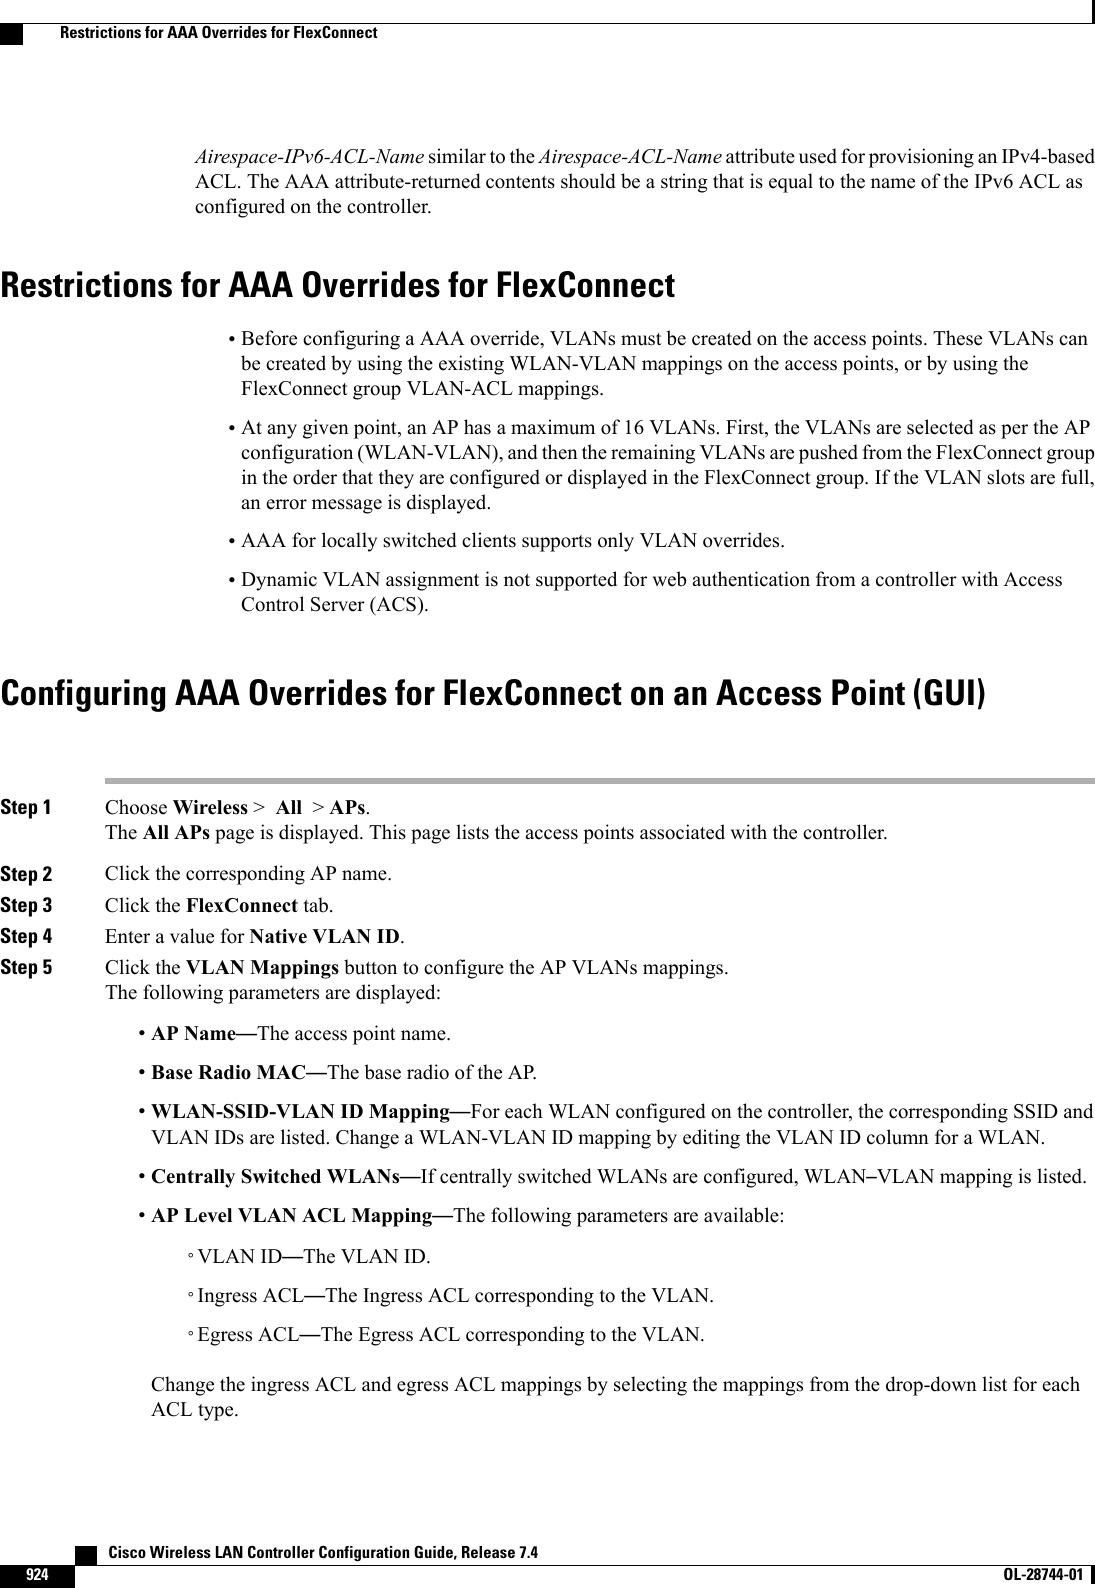 Airespace-IPv6-ACL-Name similar to the Airespace-ACL-Name attribute used for provisioning an IPv4-basedACL. The AAA attribute-returned contents should be a string that is equal to the name of the IPv6 ACL asconfigured on the controller.Restrictions for AAA Overrides for FlexConnect•Before configuring a AAA override, VLANs must be created on the access points. These VLANs canbe created by using the existing WLAN-VLAN mappings on the access points, or by using theFlexConnect group VLAN-ACL mappings.•At any given point, an AP has a maximum of 16 VLANs. First, the VLANs are selected as per the APconfiguration (WLAN-VLAN), and then the remaining VLANs are pushed from the FlexConnect groupin the order that they are configured or displayed in the FlexConnect group. If the VLAN slots are full,an error message is displayed.•AAA for locally switched clients supports only VLAN overrides.•Dynamic VLAN assignment is not supported for web authentication from a controller with AccessControl Server (ACS).Configuring AAA Overrides for FlexConnect on an Access Point (GUI)Step 1 Choose Wireless &gt;All &gt;APs.The All APs page is displayed. This page lists the access points associated with the controller.Step 2 Click the corresponding AP name.Step 3 Click the FlexConnect tab.Step 4 Enter a value for Native VLAN ID.Step 5 Click the VLAN Mappings button to configure the AP VLANs mappings.The following parameters are displayed:•AP Name—The access point name.•Base Radio MAC—The base radio of the AP.•WLAN-SSID-VLAN ID Mapping—For each WLAN configured on the controller, the corresponding SSID andVLAN IDs are listed. Change a WLAN-VLAN ID mapping by editing the VLAN ID column for a WLAN.•Centrally Switched WLANs—If centrally switched WLANs are configured, WLAN–VLAN mapping is listed.•AP Level VLAN ACL Mapping—The following parameters are available:◦VLAN ID—The VLAN ID.◦Ingress ACL—The Ingress ACL corresponding to the VLAN.◦Egress ACL—The Egress ACL corresponding to the VLAN.Change the ingress ACL and egress ACL mappings by selecting the mappings from the drop-down list for eachACL type.   Cisco Wireless LAN Controller Configuration Guide, Release 7.4924 OL-28744-01  Restrictions for AAA Overrides for FlexConnect